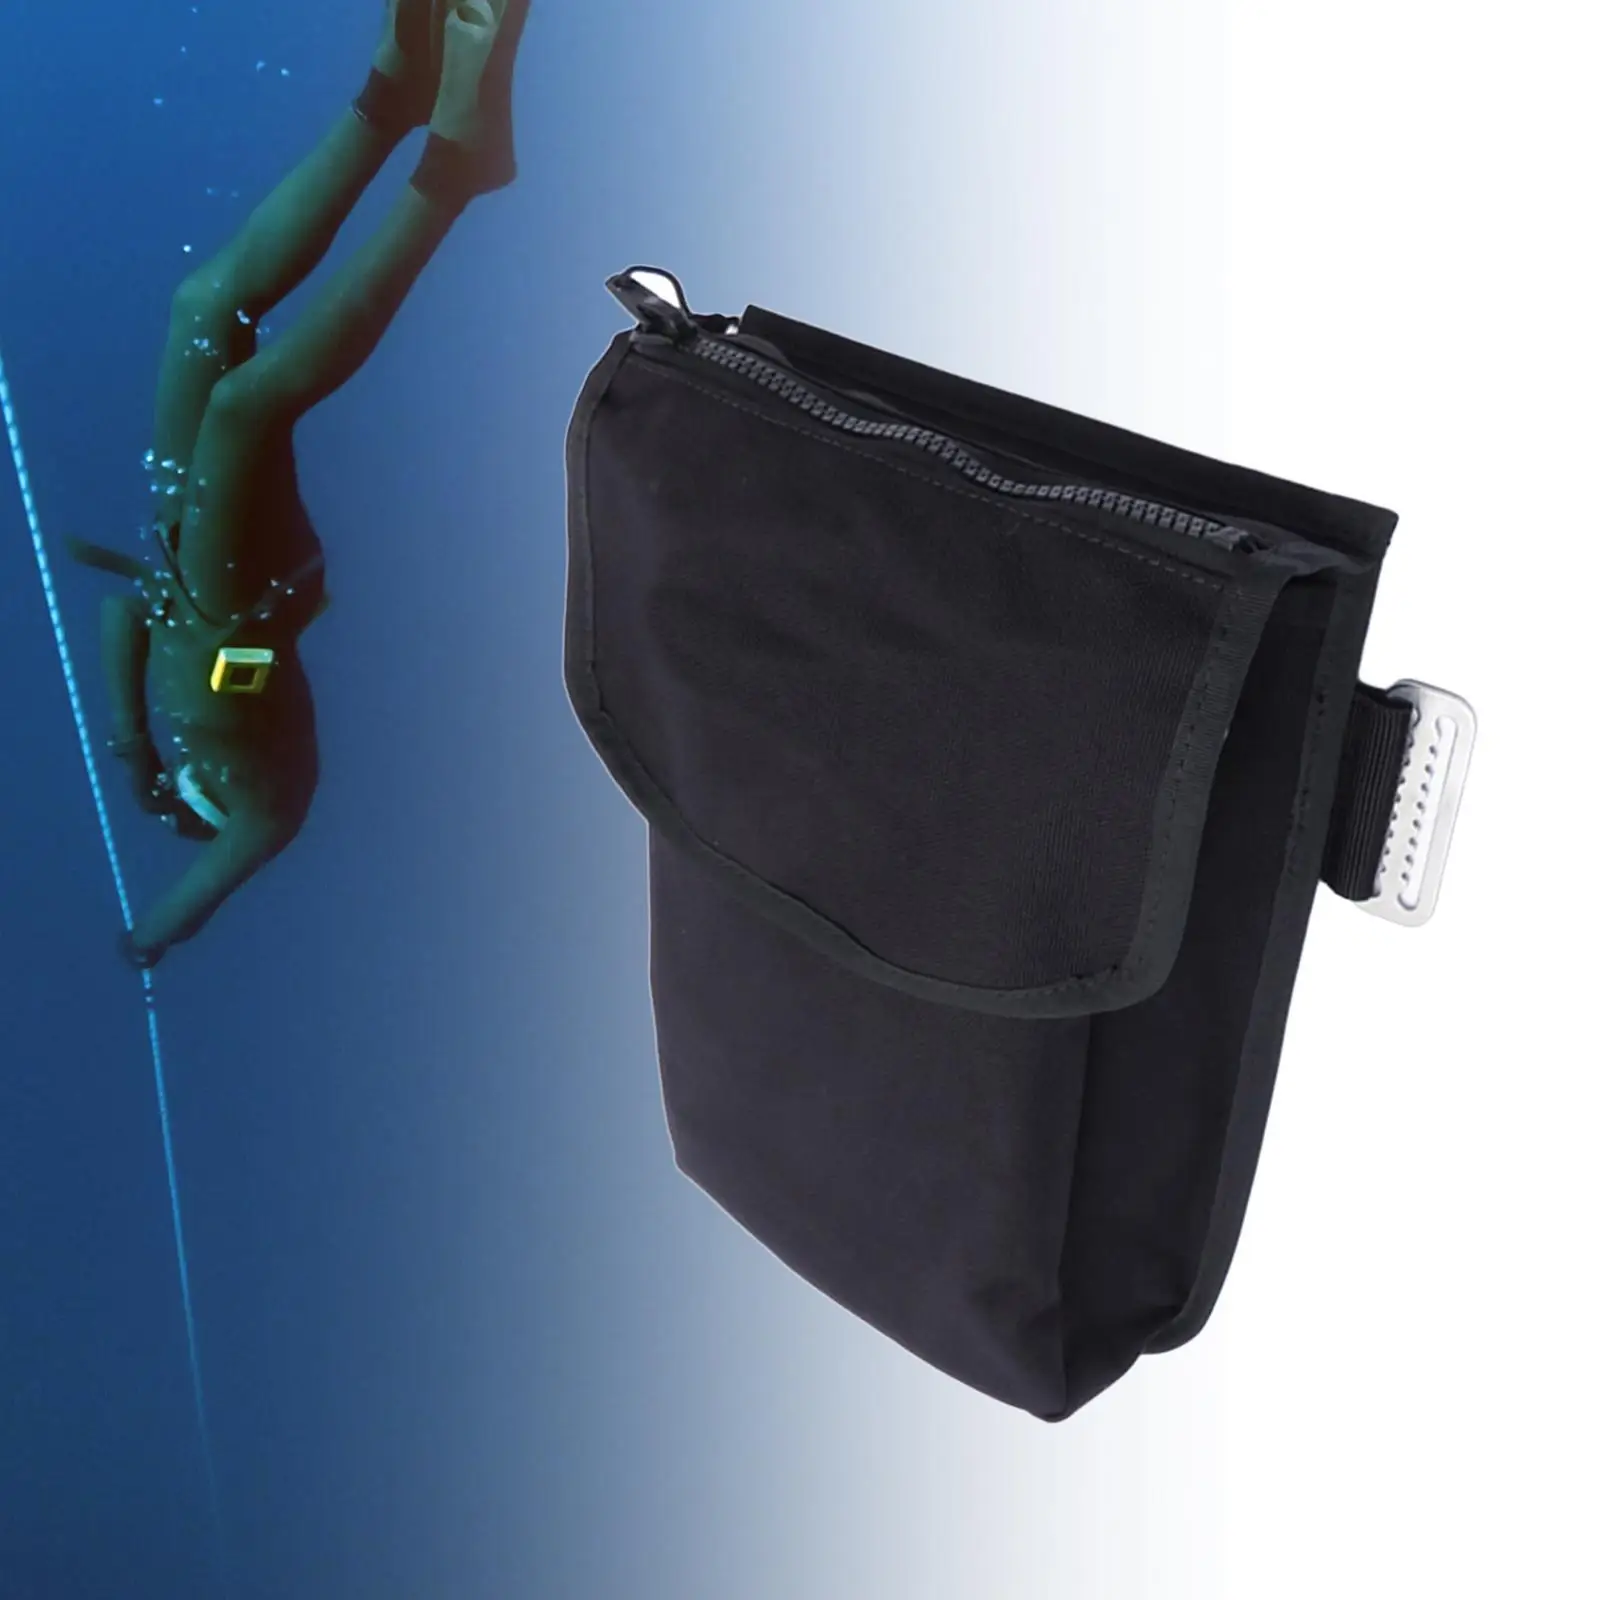 Scuba Diving Thigh Pocket Storage Pocket Pouch Scuba Diving Accessories for Water Sports Underwater Swimming Snorkeling Black